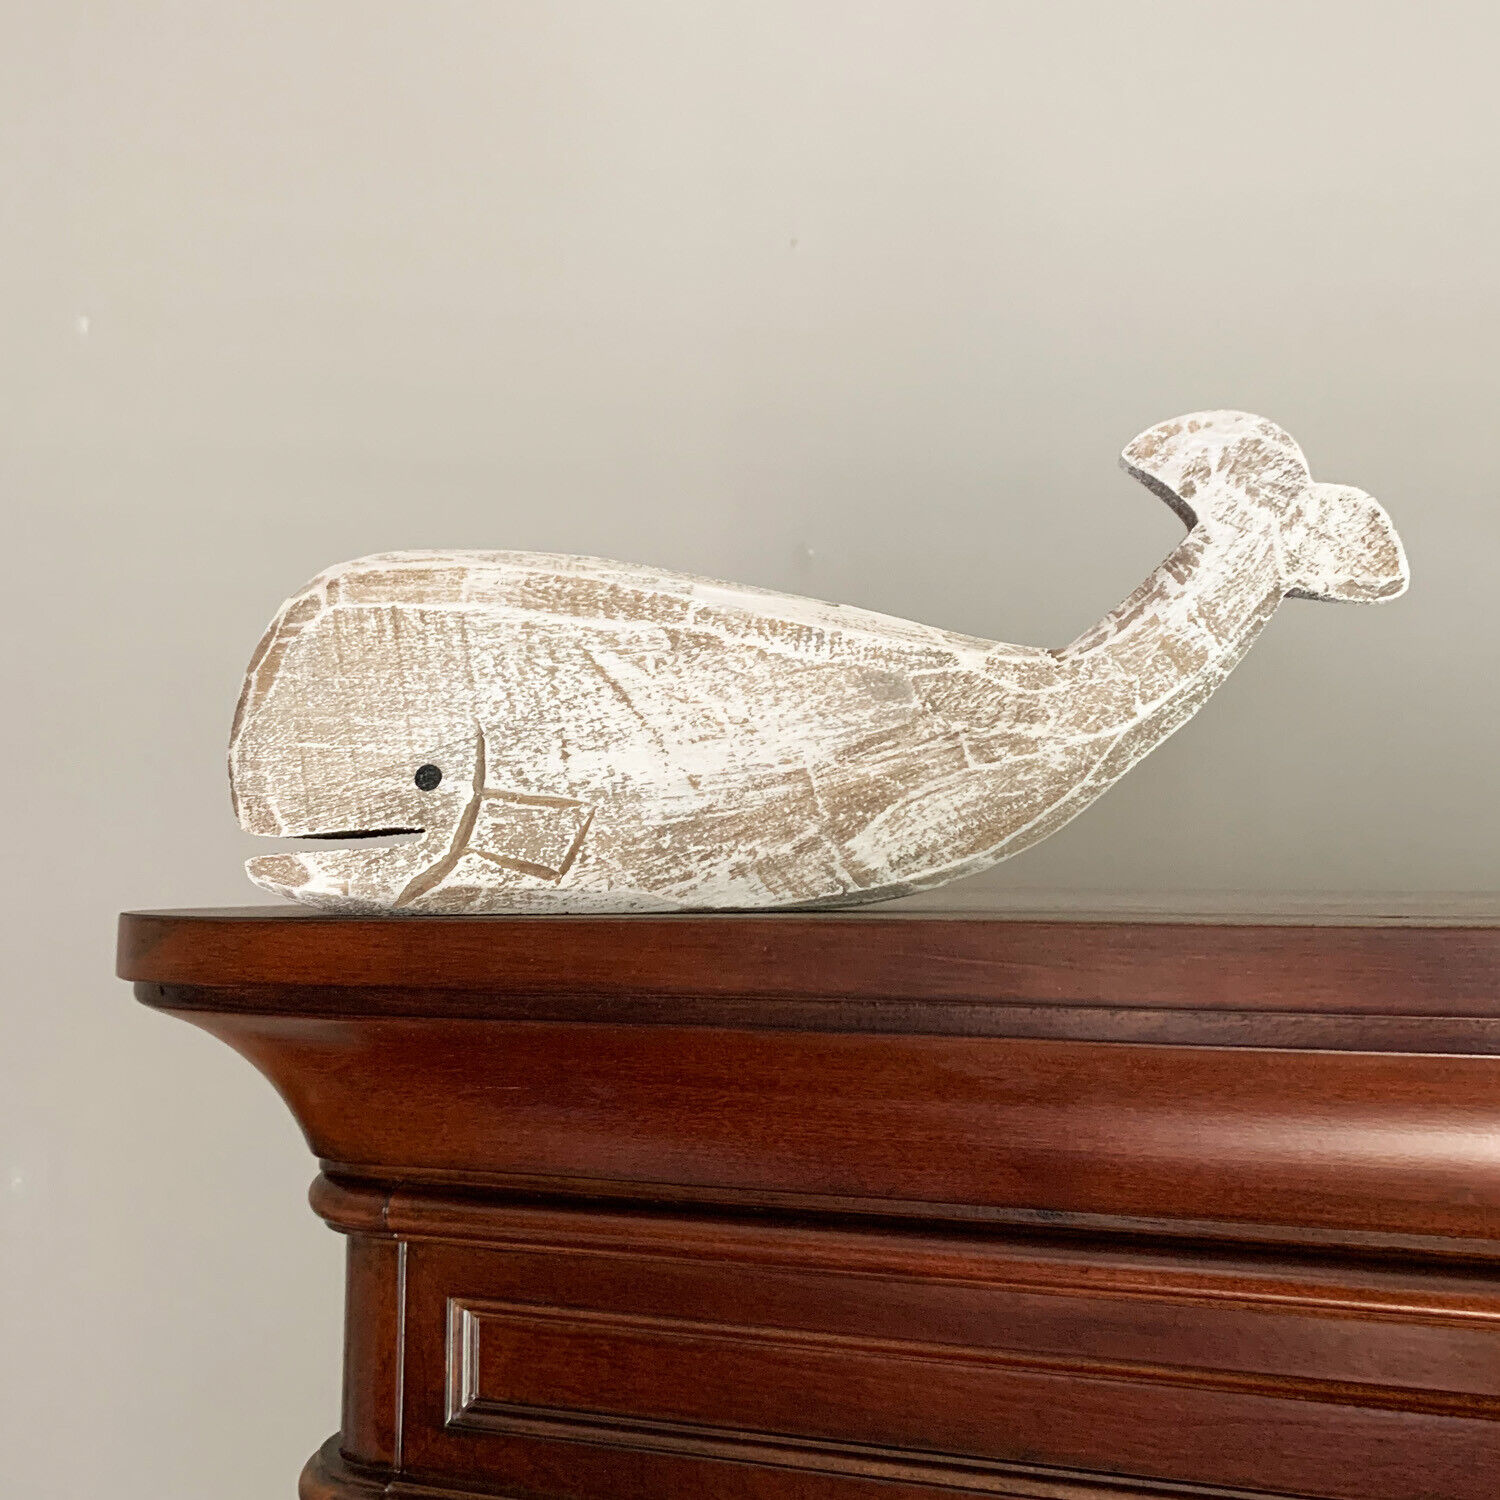 Rustic Wooden Whale Tabletop Statue, Rustic Wooden Decorative Whale Figurine 